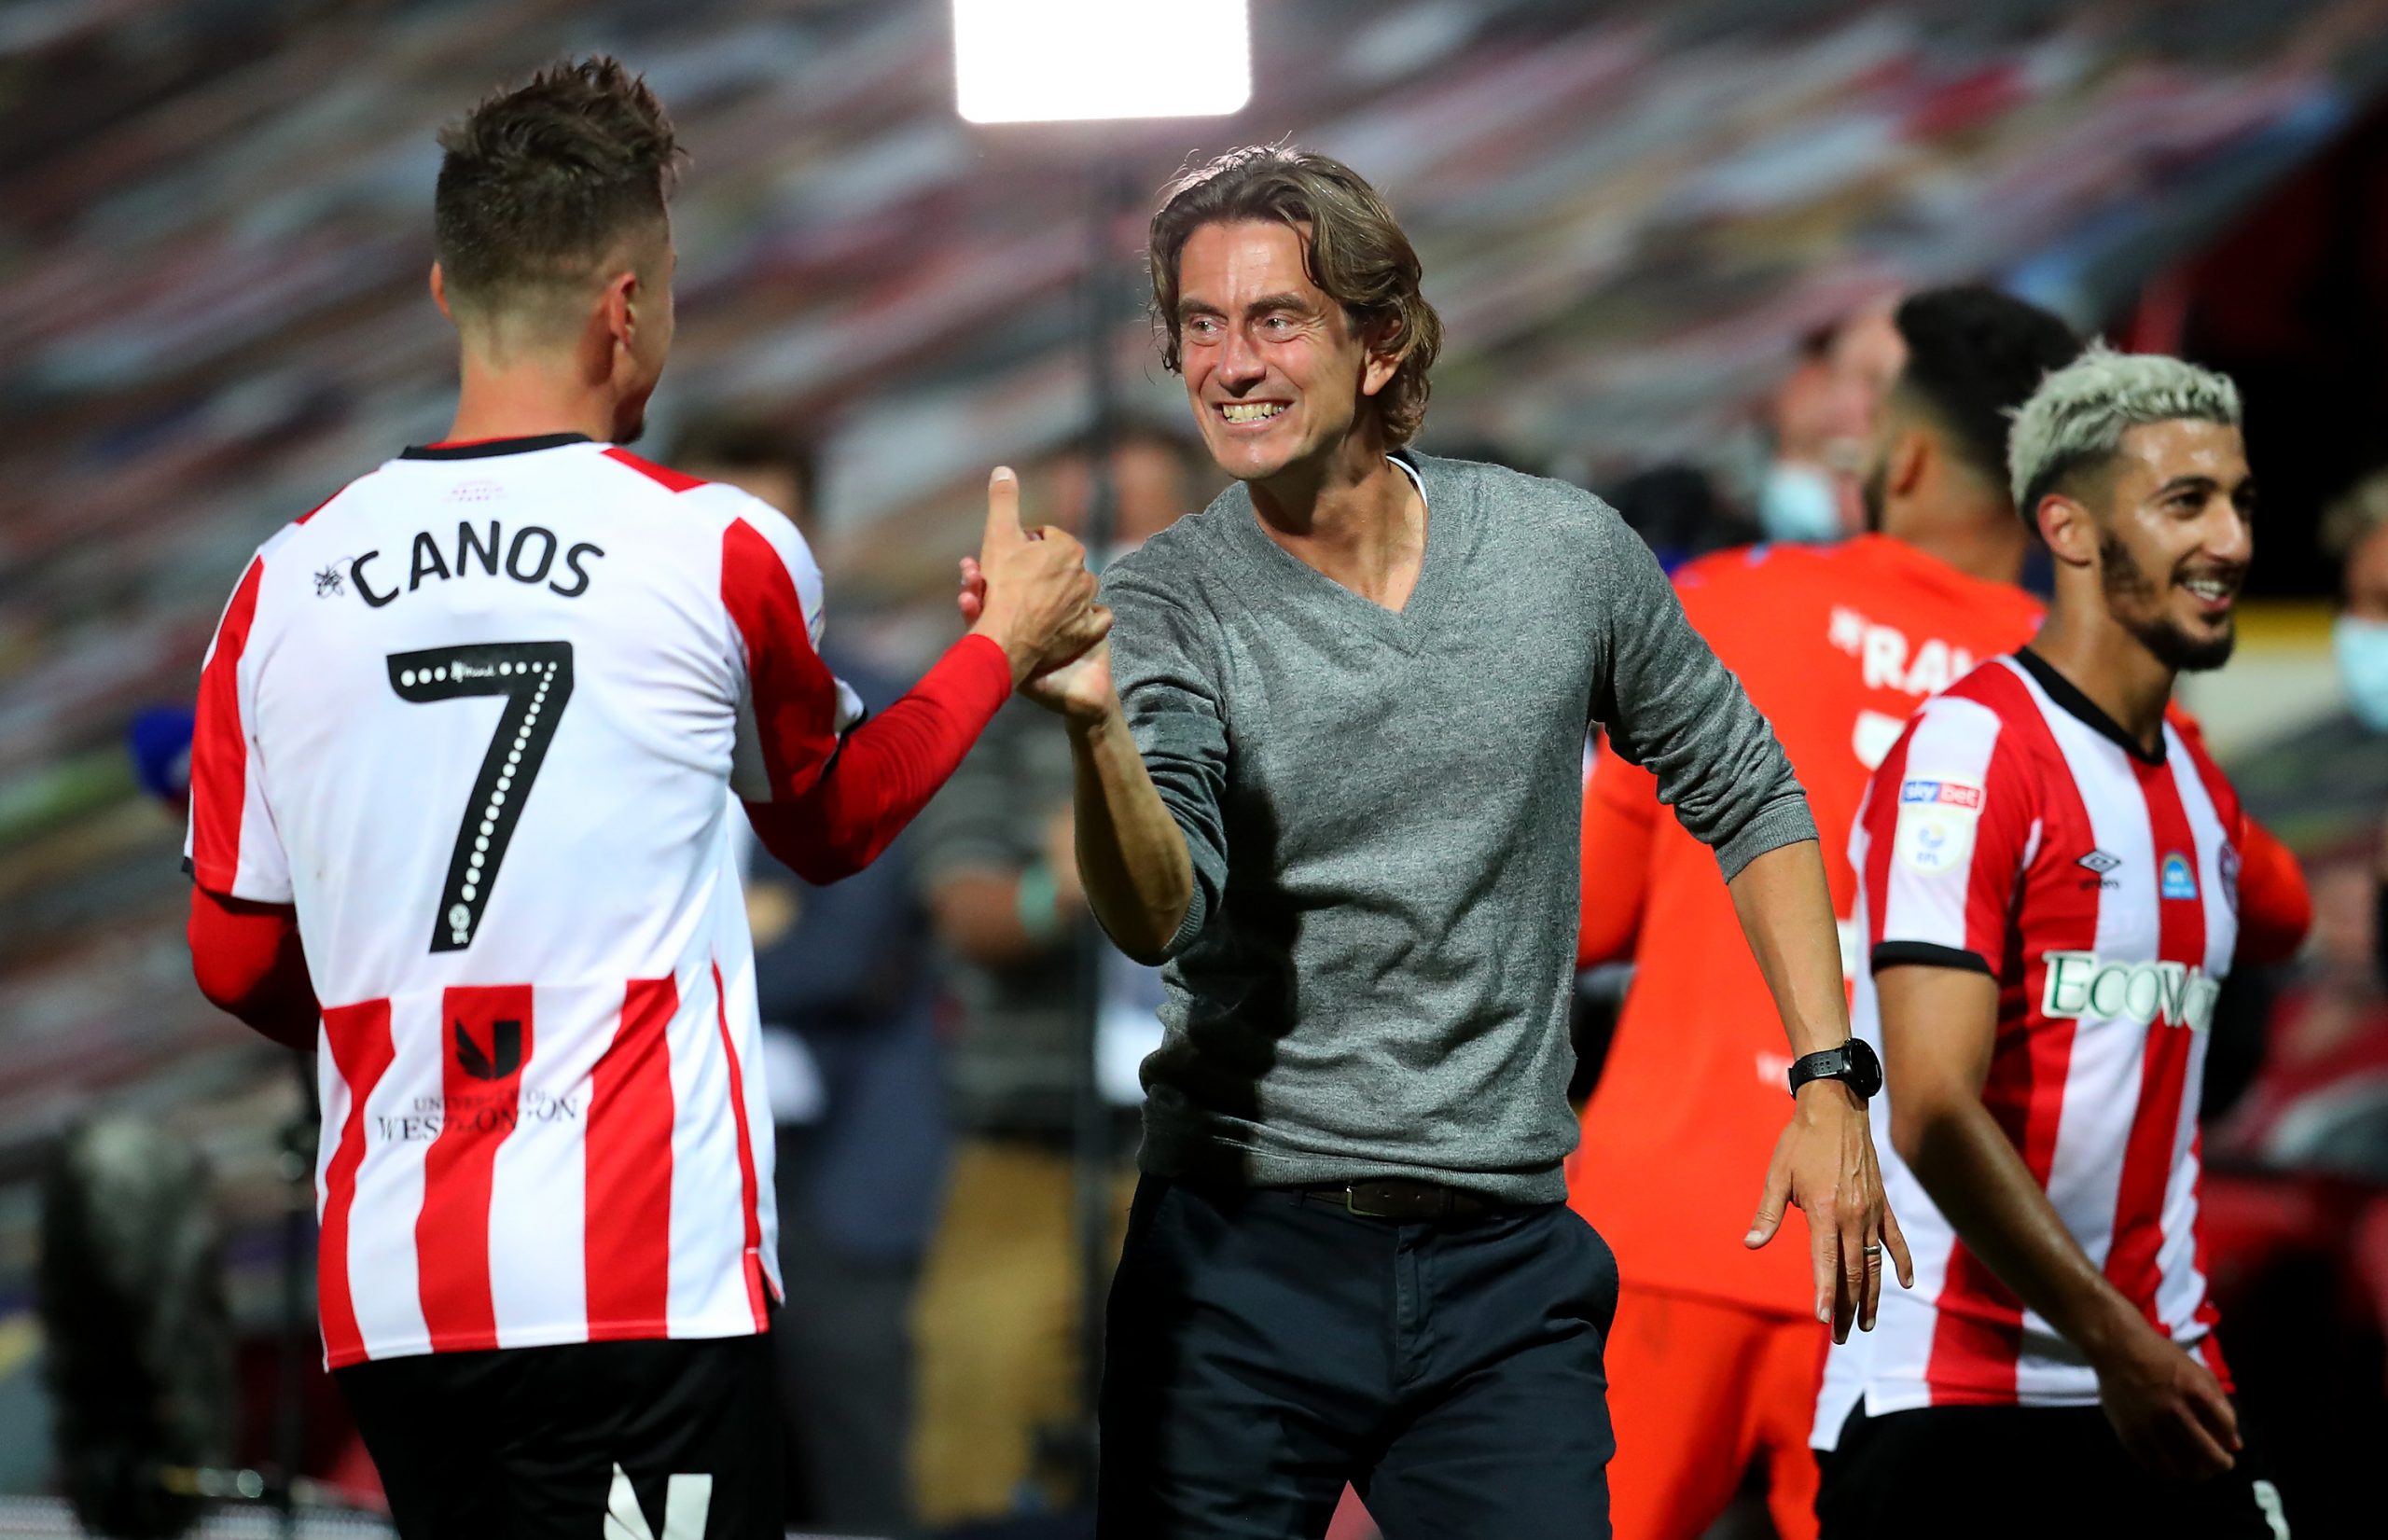 BRENTFORD, ENGLAND - JULY 29: Thomas Frank (R), head coach of Brentford celebrate with team mate Sergi Canós after the Sky Bet Championship Play Off Semi-final 2nd Leg match between Brentford and Swansea City at Griffin Park on July 29, 2020 in Brentford, England. Football Stadiums around Europe remain empty due to the Coronavirus Pandemic as Government social distancing laws prohibit fans inside venues resulting in all fixtures being played behind closed doors. (Photo by Catherine Ivill/Getty Images)